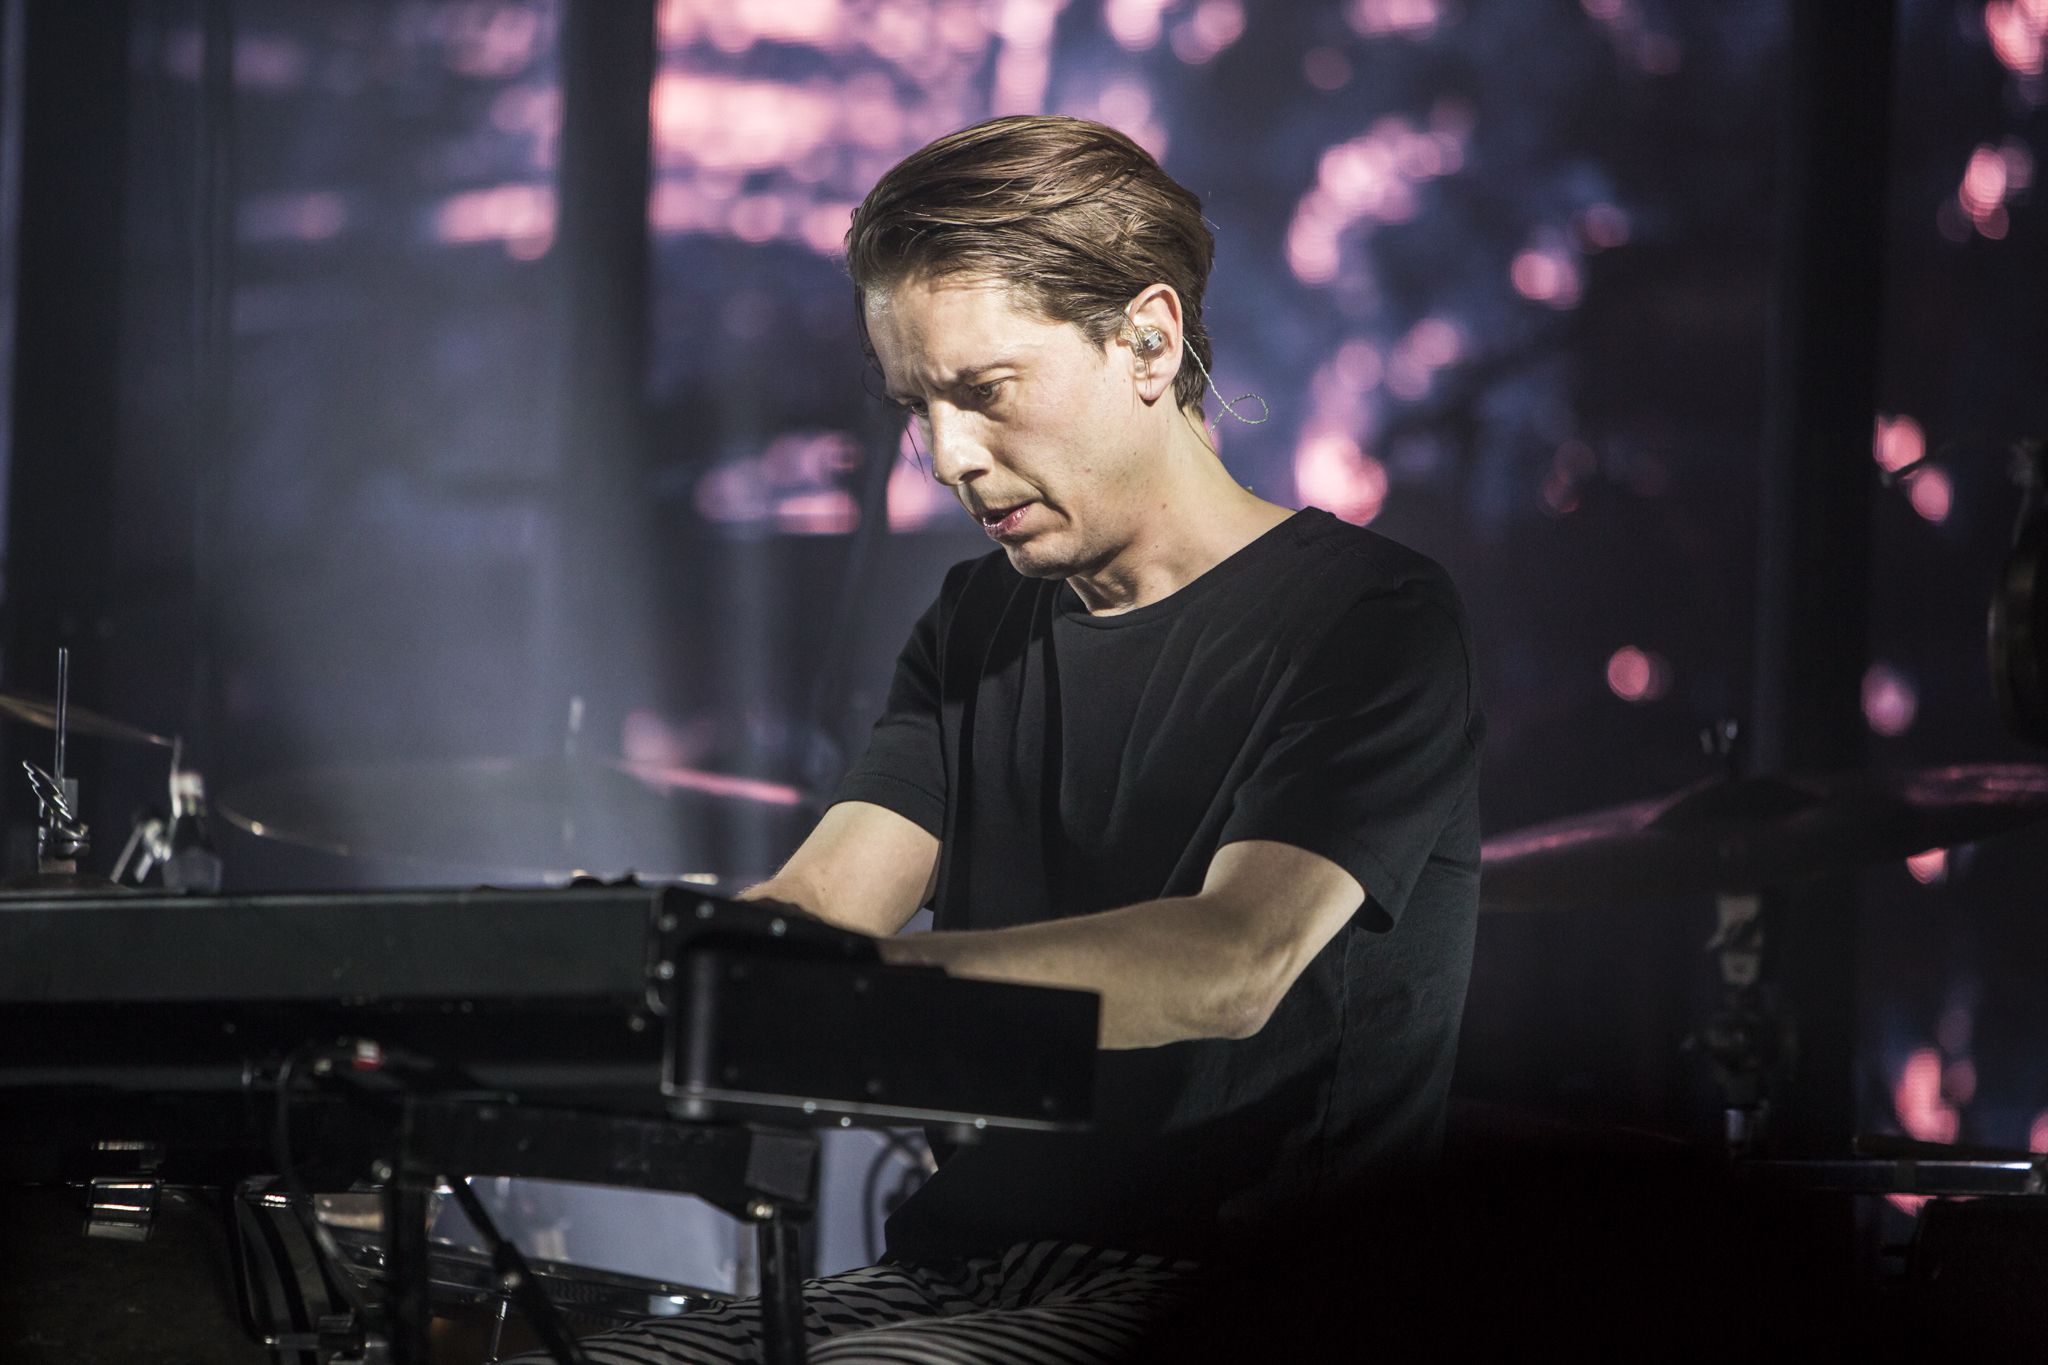 sigur ros 11 Live Review: Sigur Rós at the Fox Theater in Pomona (4/10)